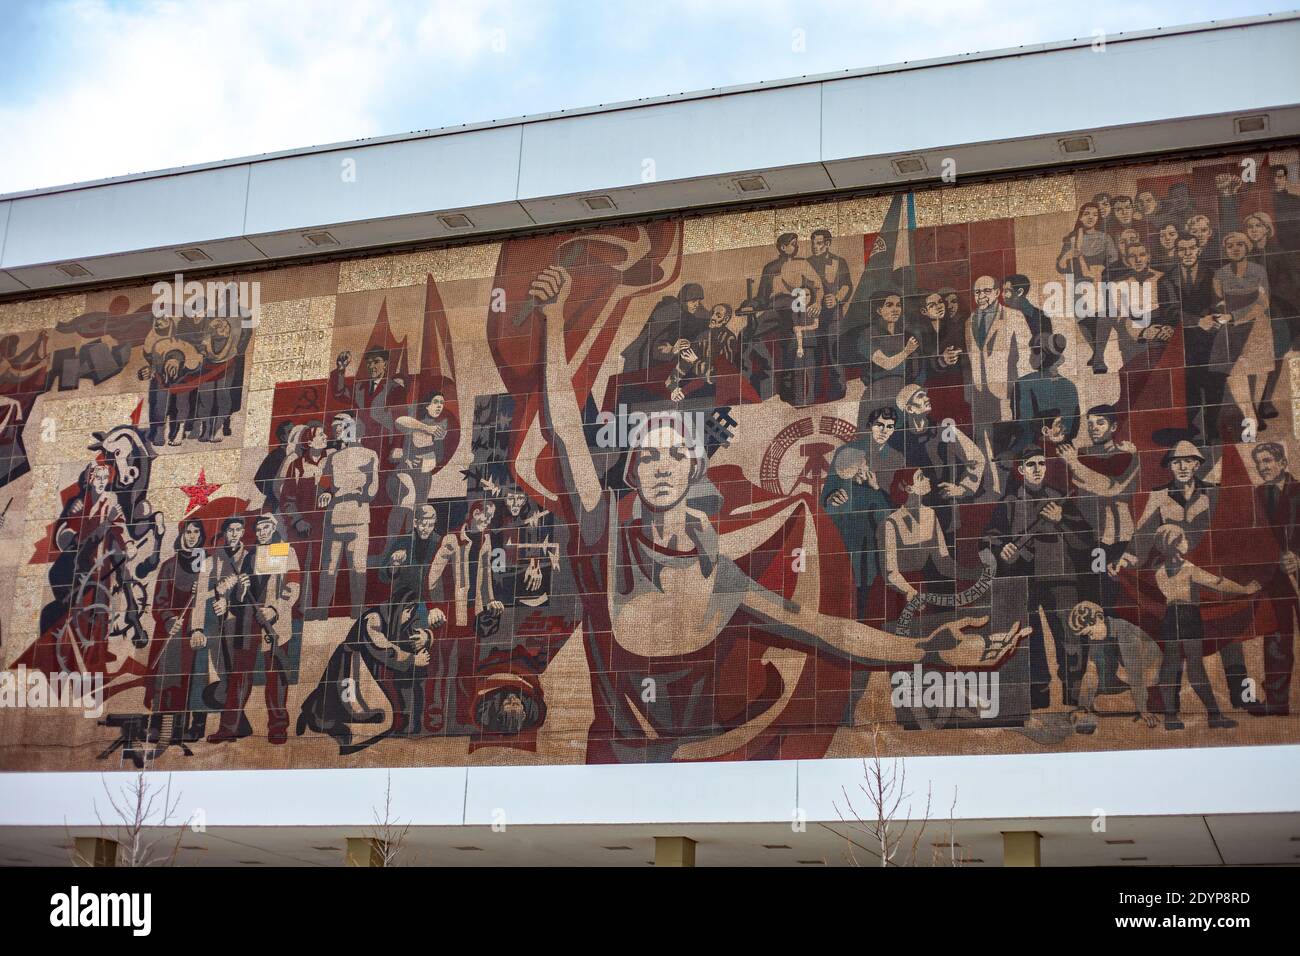 Communist-era mural on the wall of the Kulturpalast in Dresden, Germany. Photographed on a bright day. Stock Photo